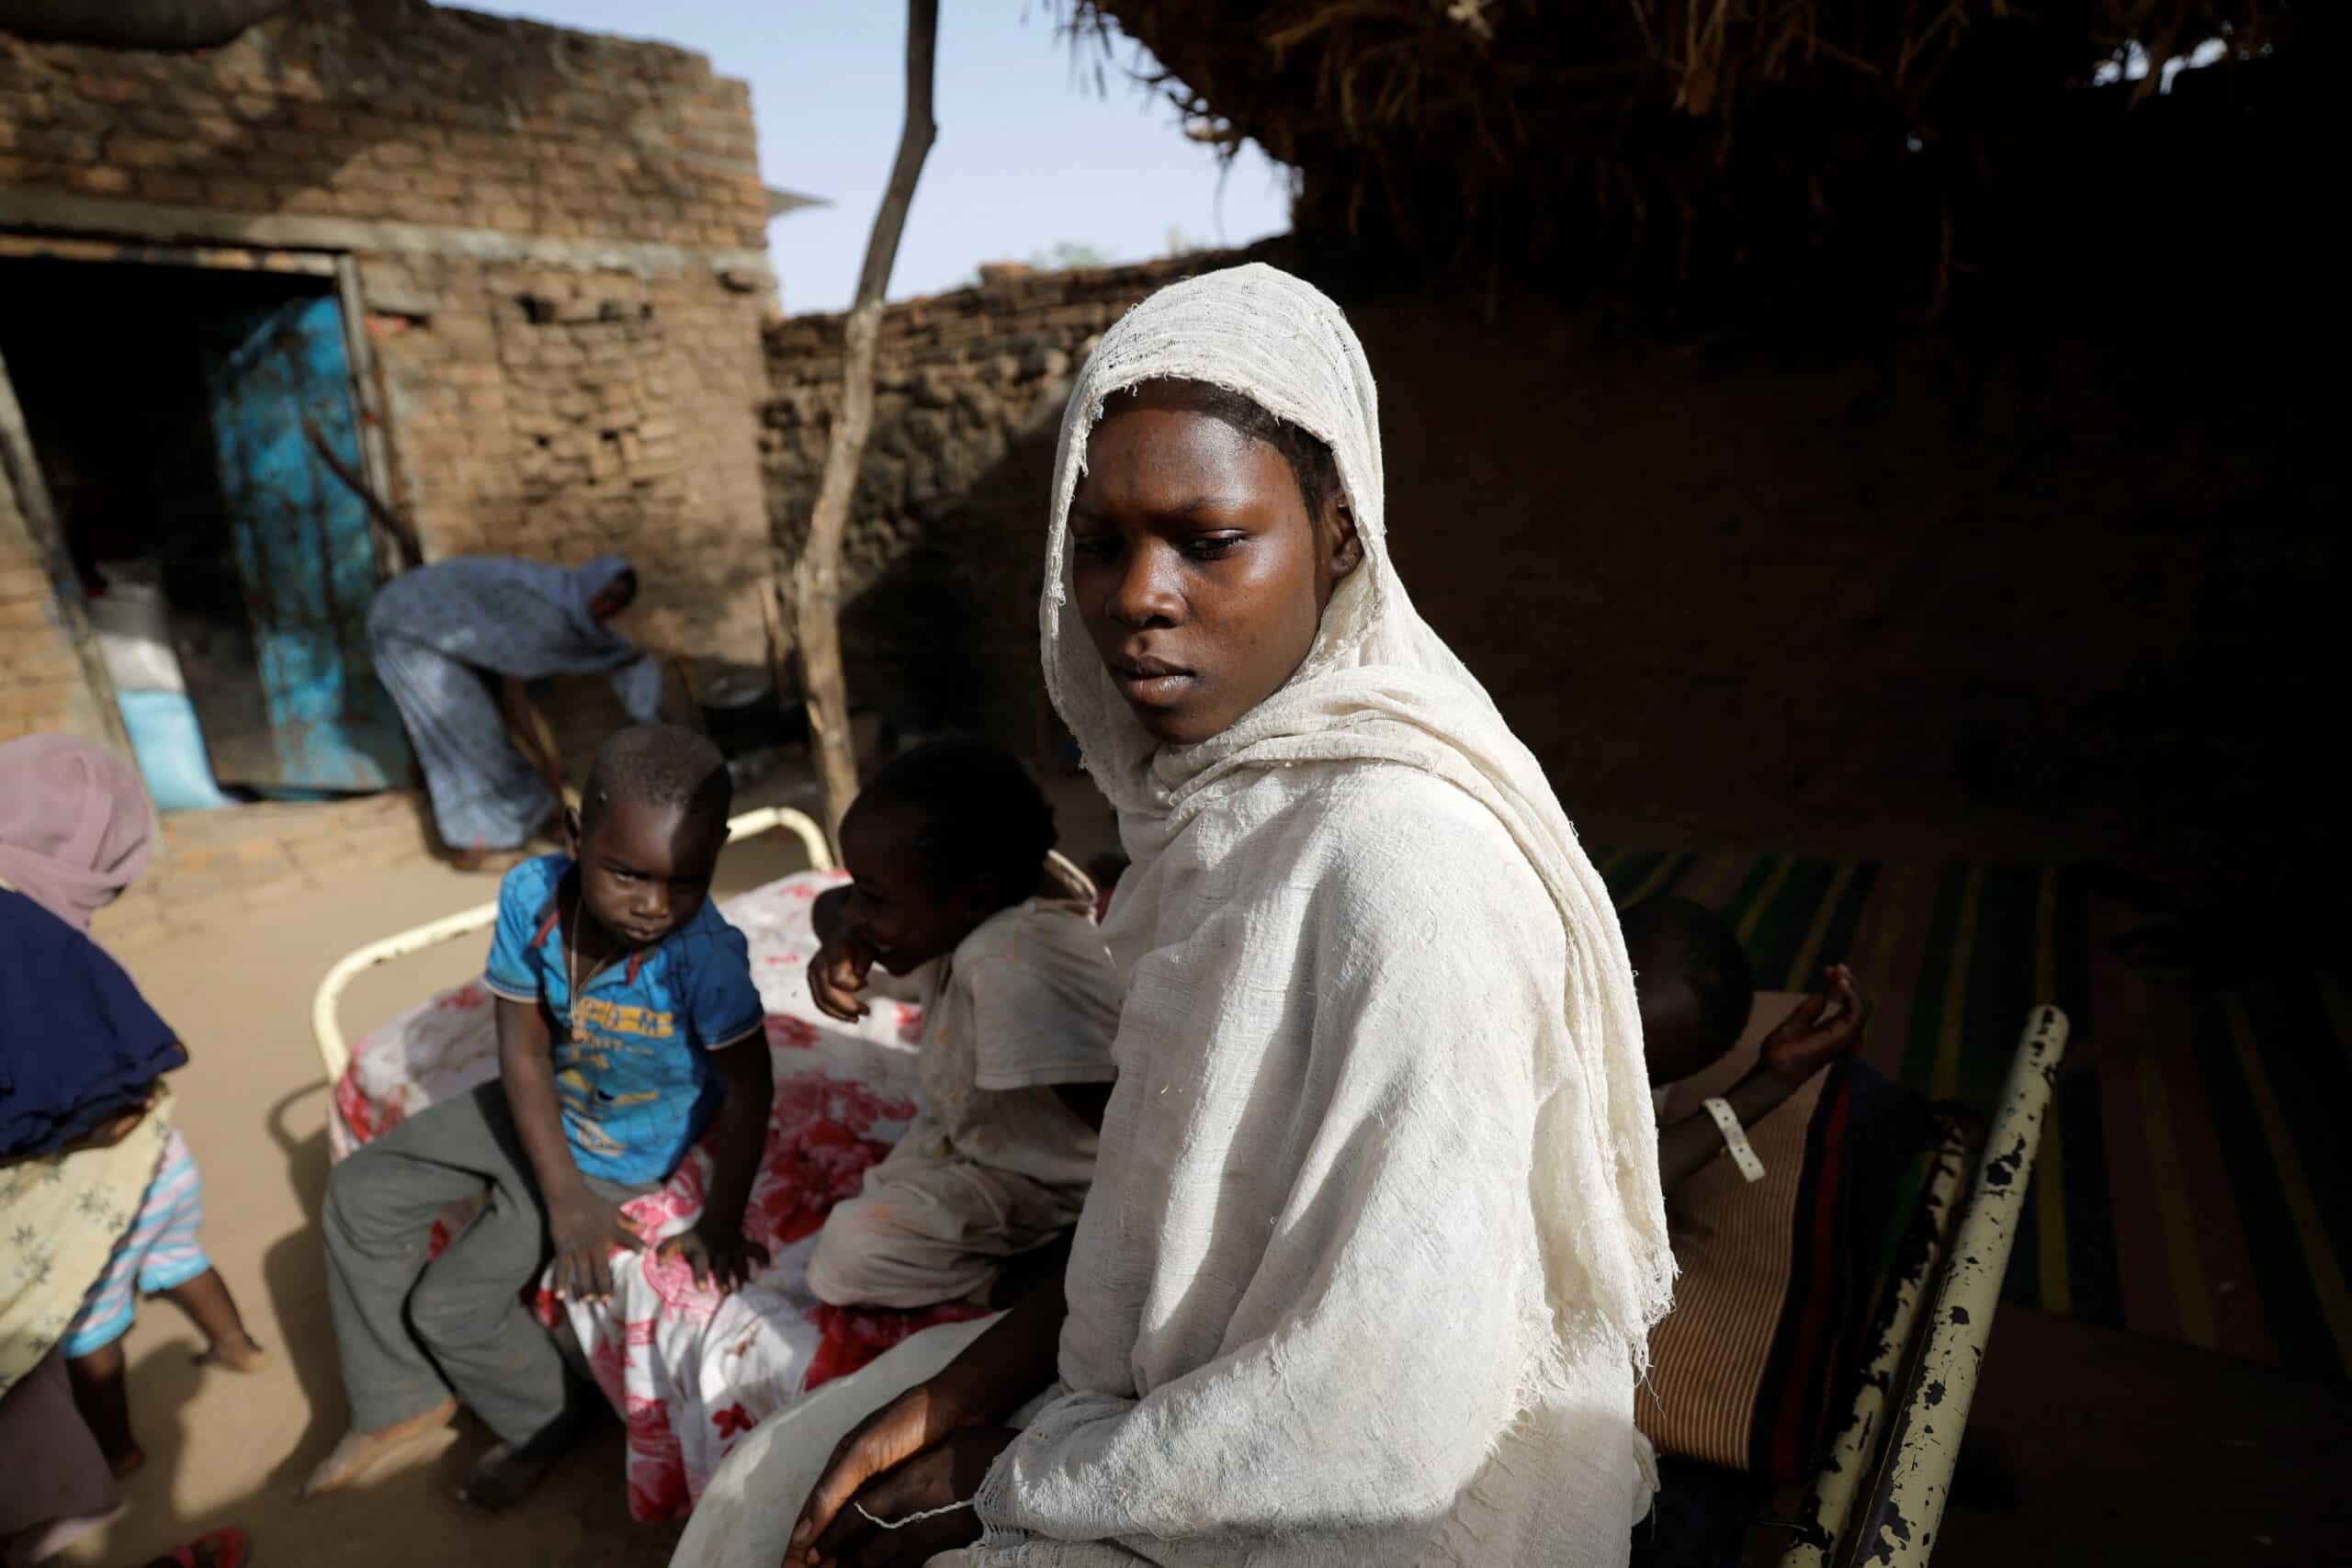 A young Sudanese woman who fled the violence in Sudan's Darfur region stands in the yard of a Chadian's family house May 14, 2023. She took refuge at the house in Koufroun, Chad, near the border between that country and Sudan. (OSV News photo/Zohra Bensemra, Reuters)